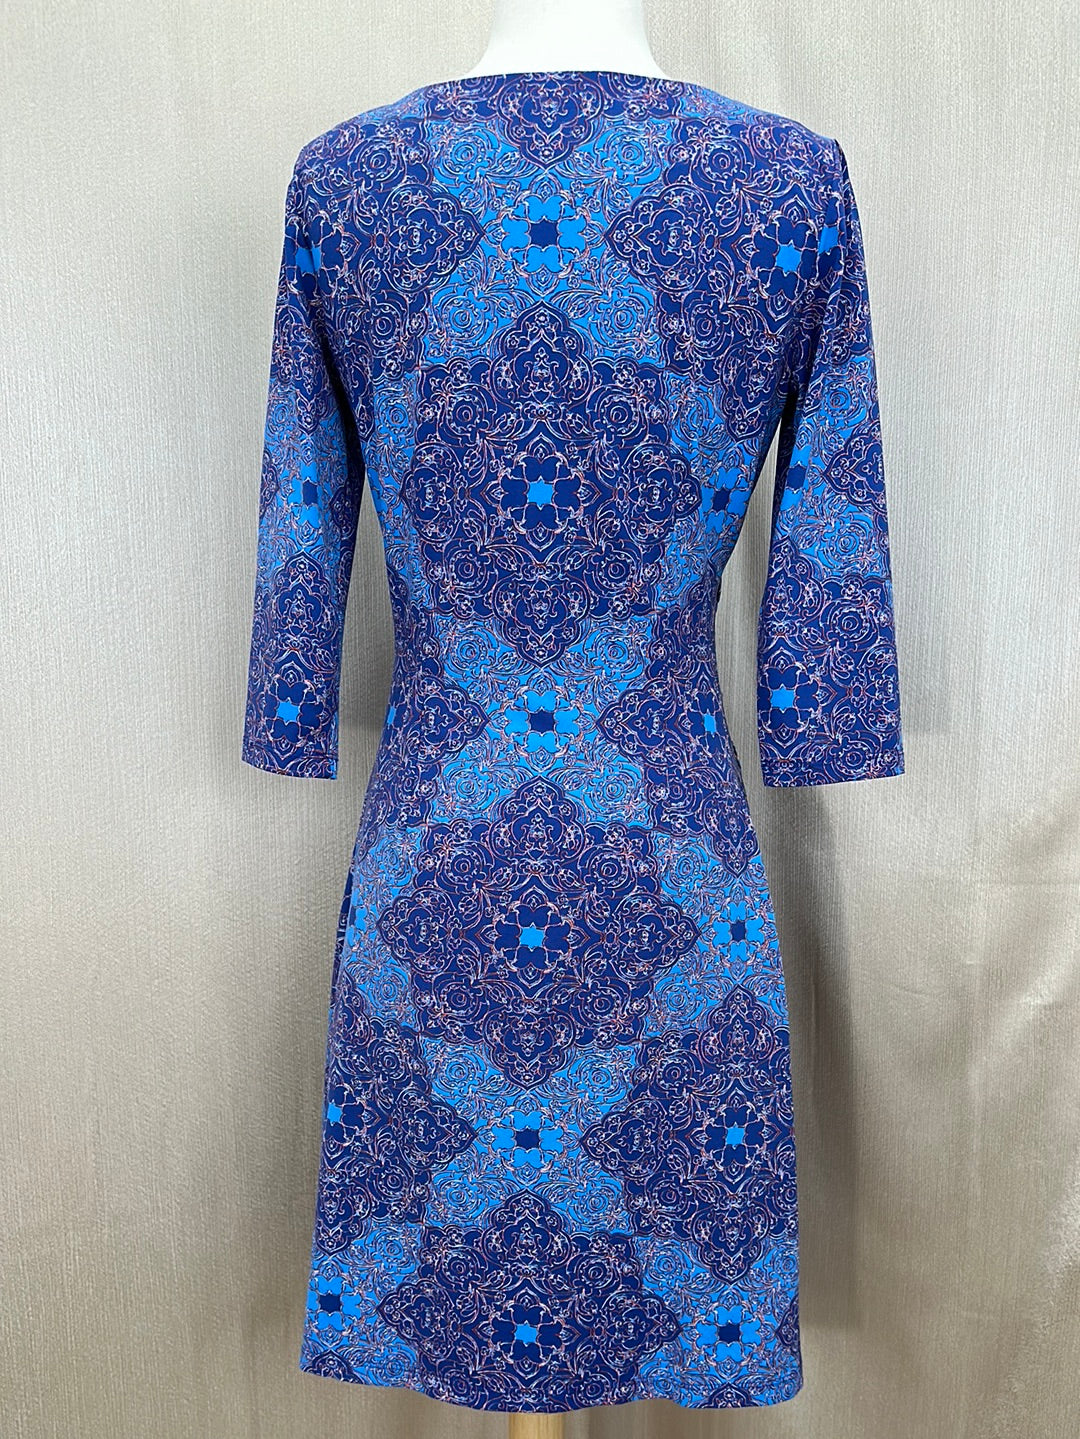 J. MCLAUGHLIN blue print Catalina Cloth 3/4 Sleeve Side Ruched Dress - S